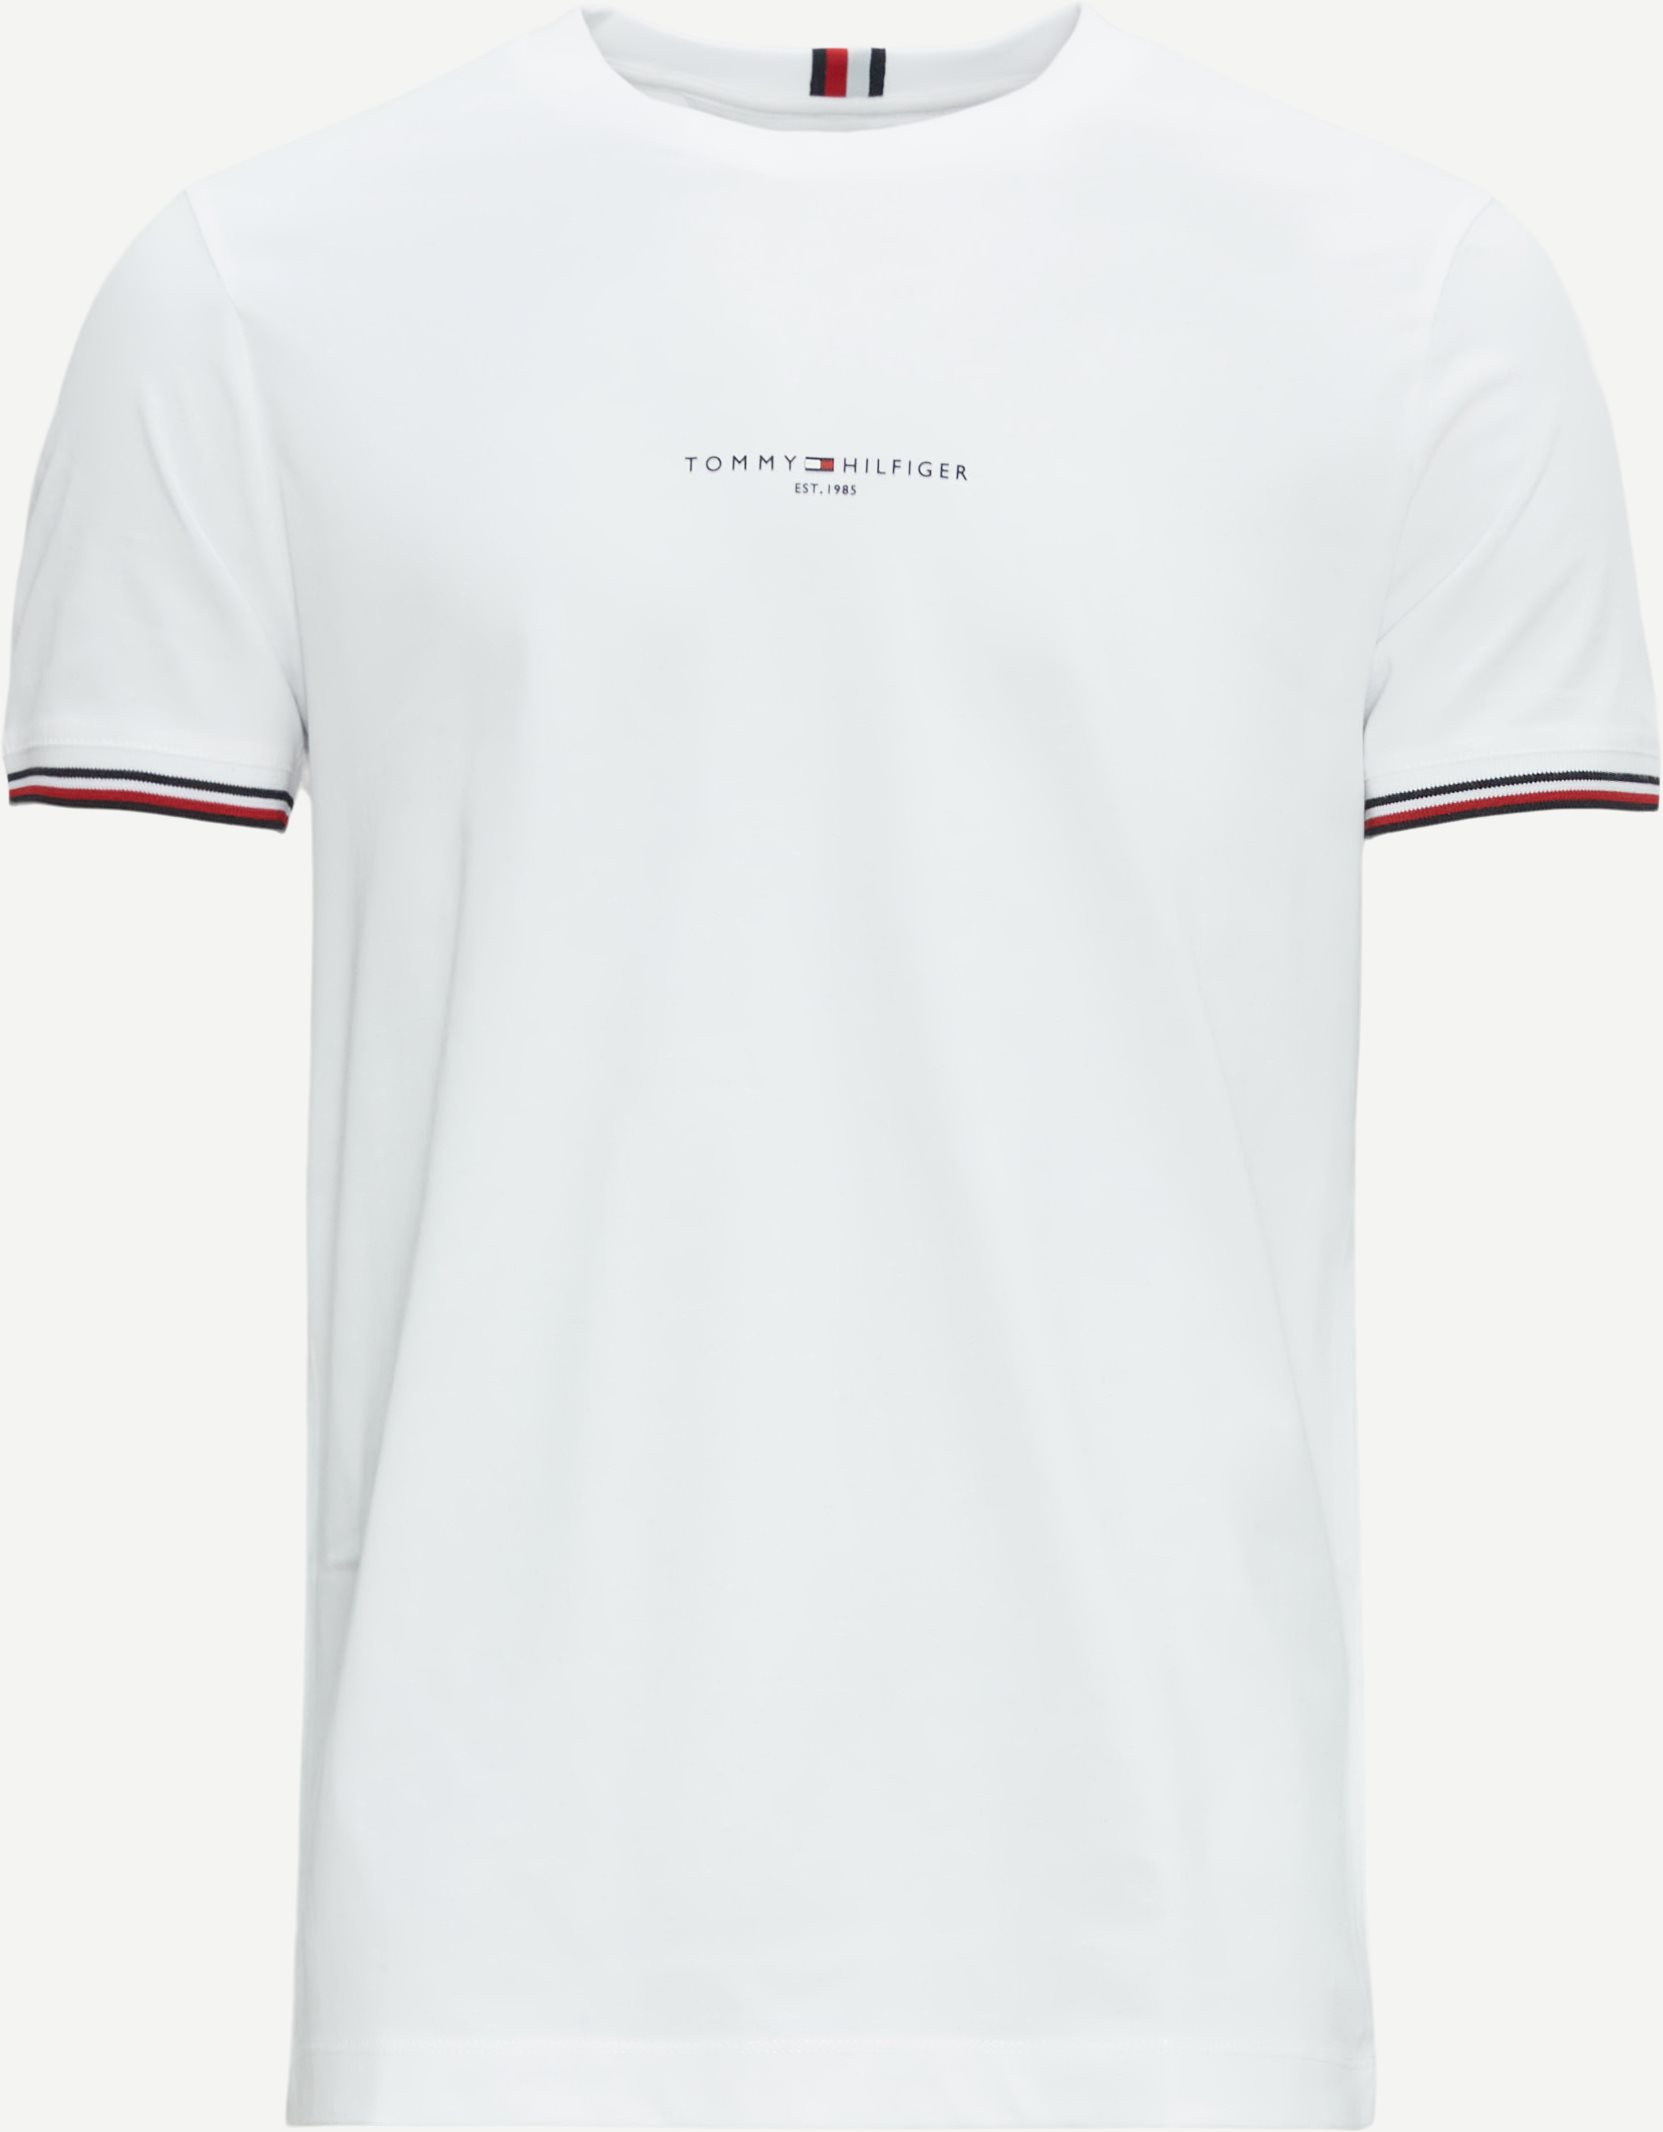 Tommy Hilfiger T-shirts 32584 TOMMY LOGO TIPPED TEE White